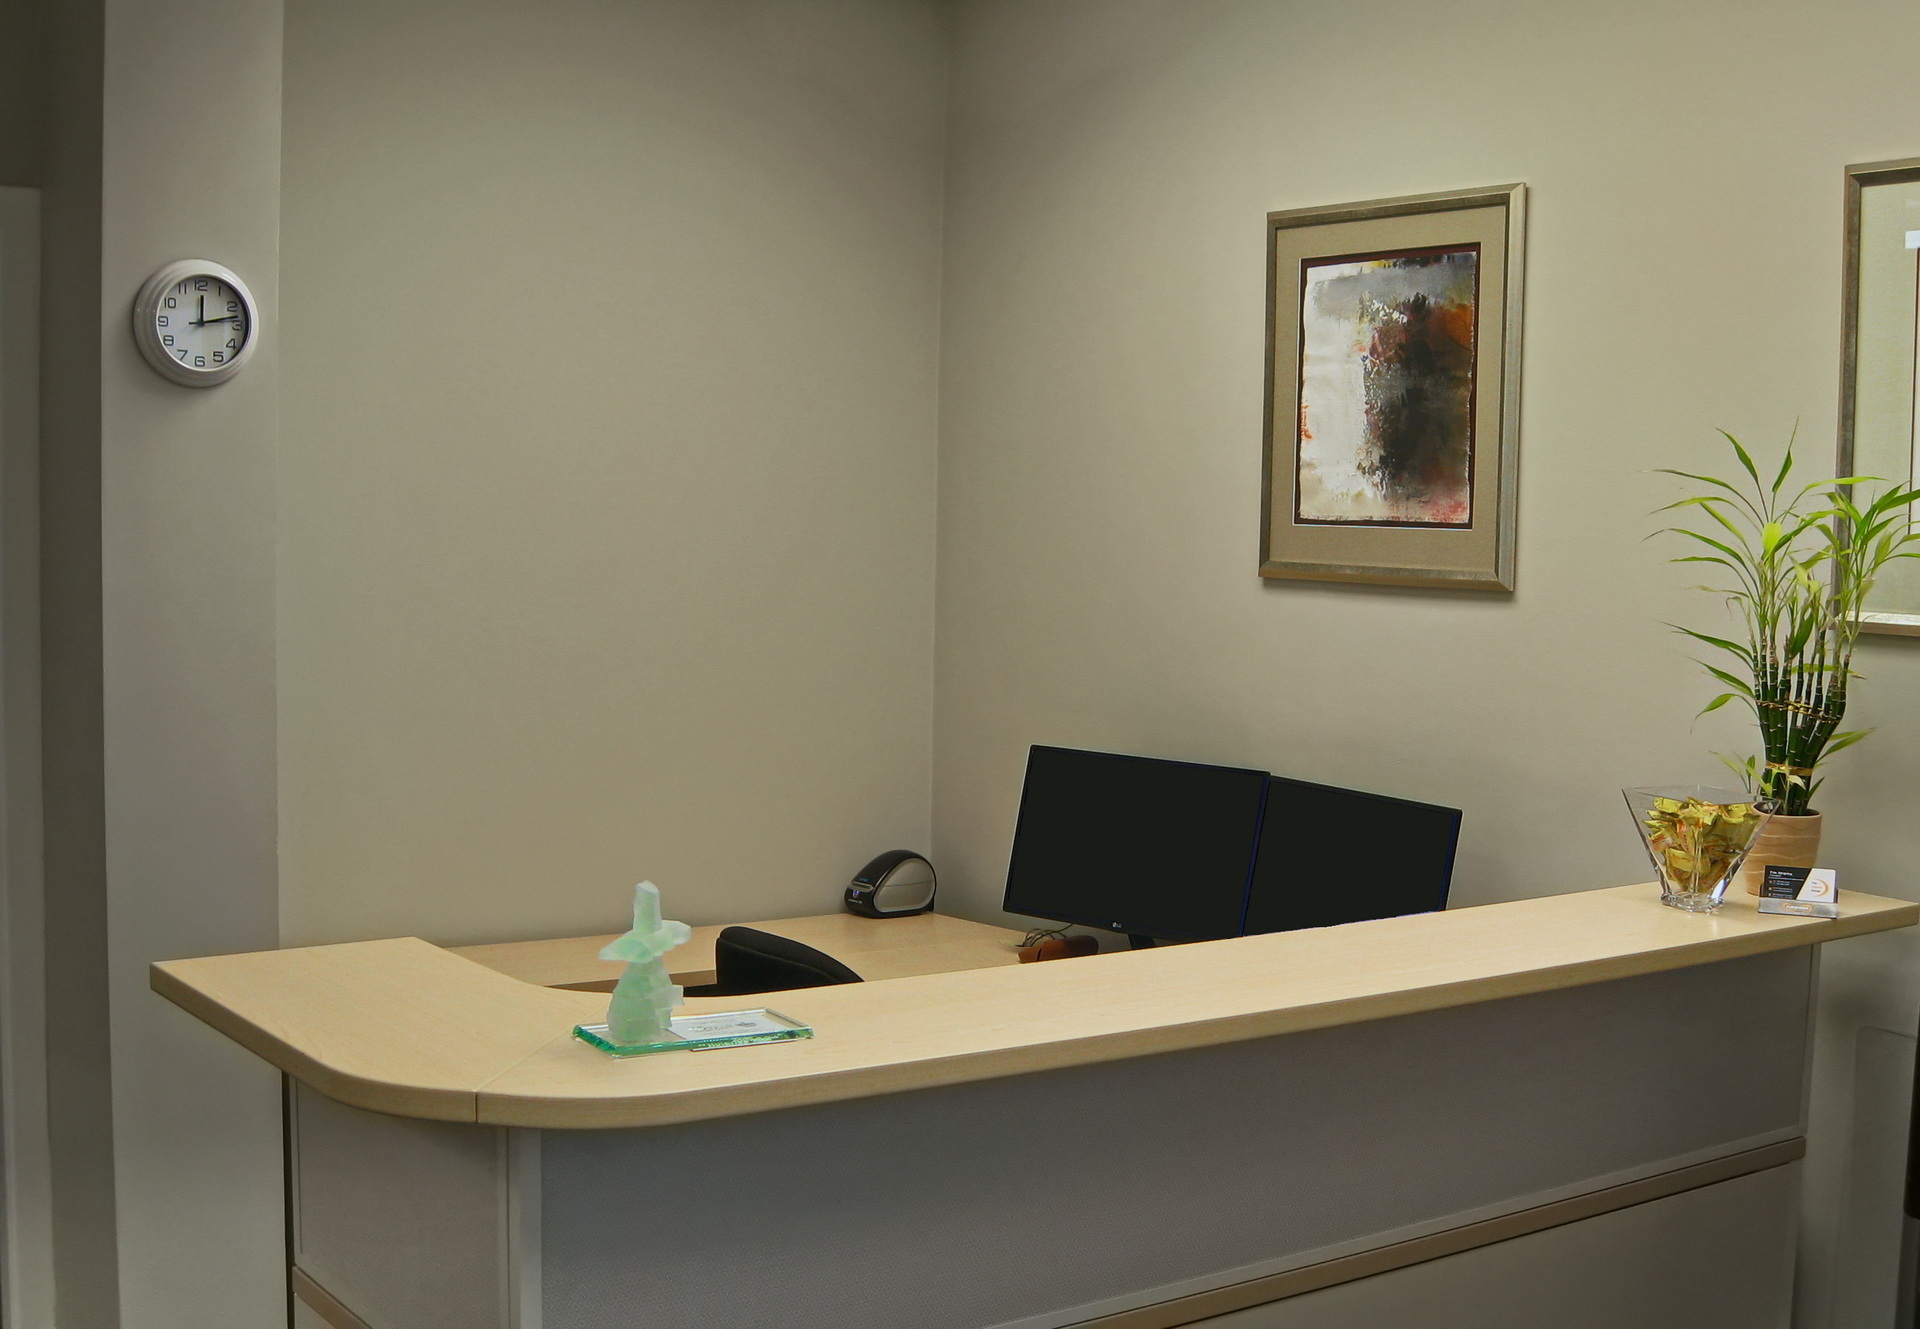 The Shipley Group Office offers a relaxed feel.